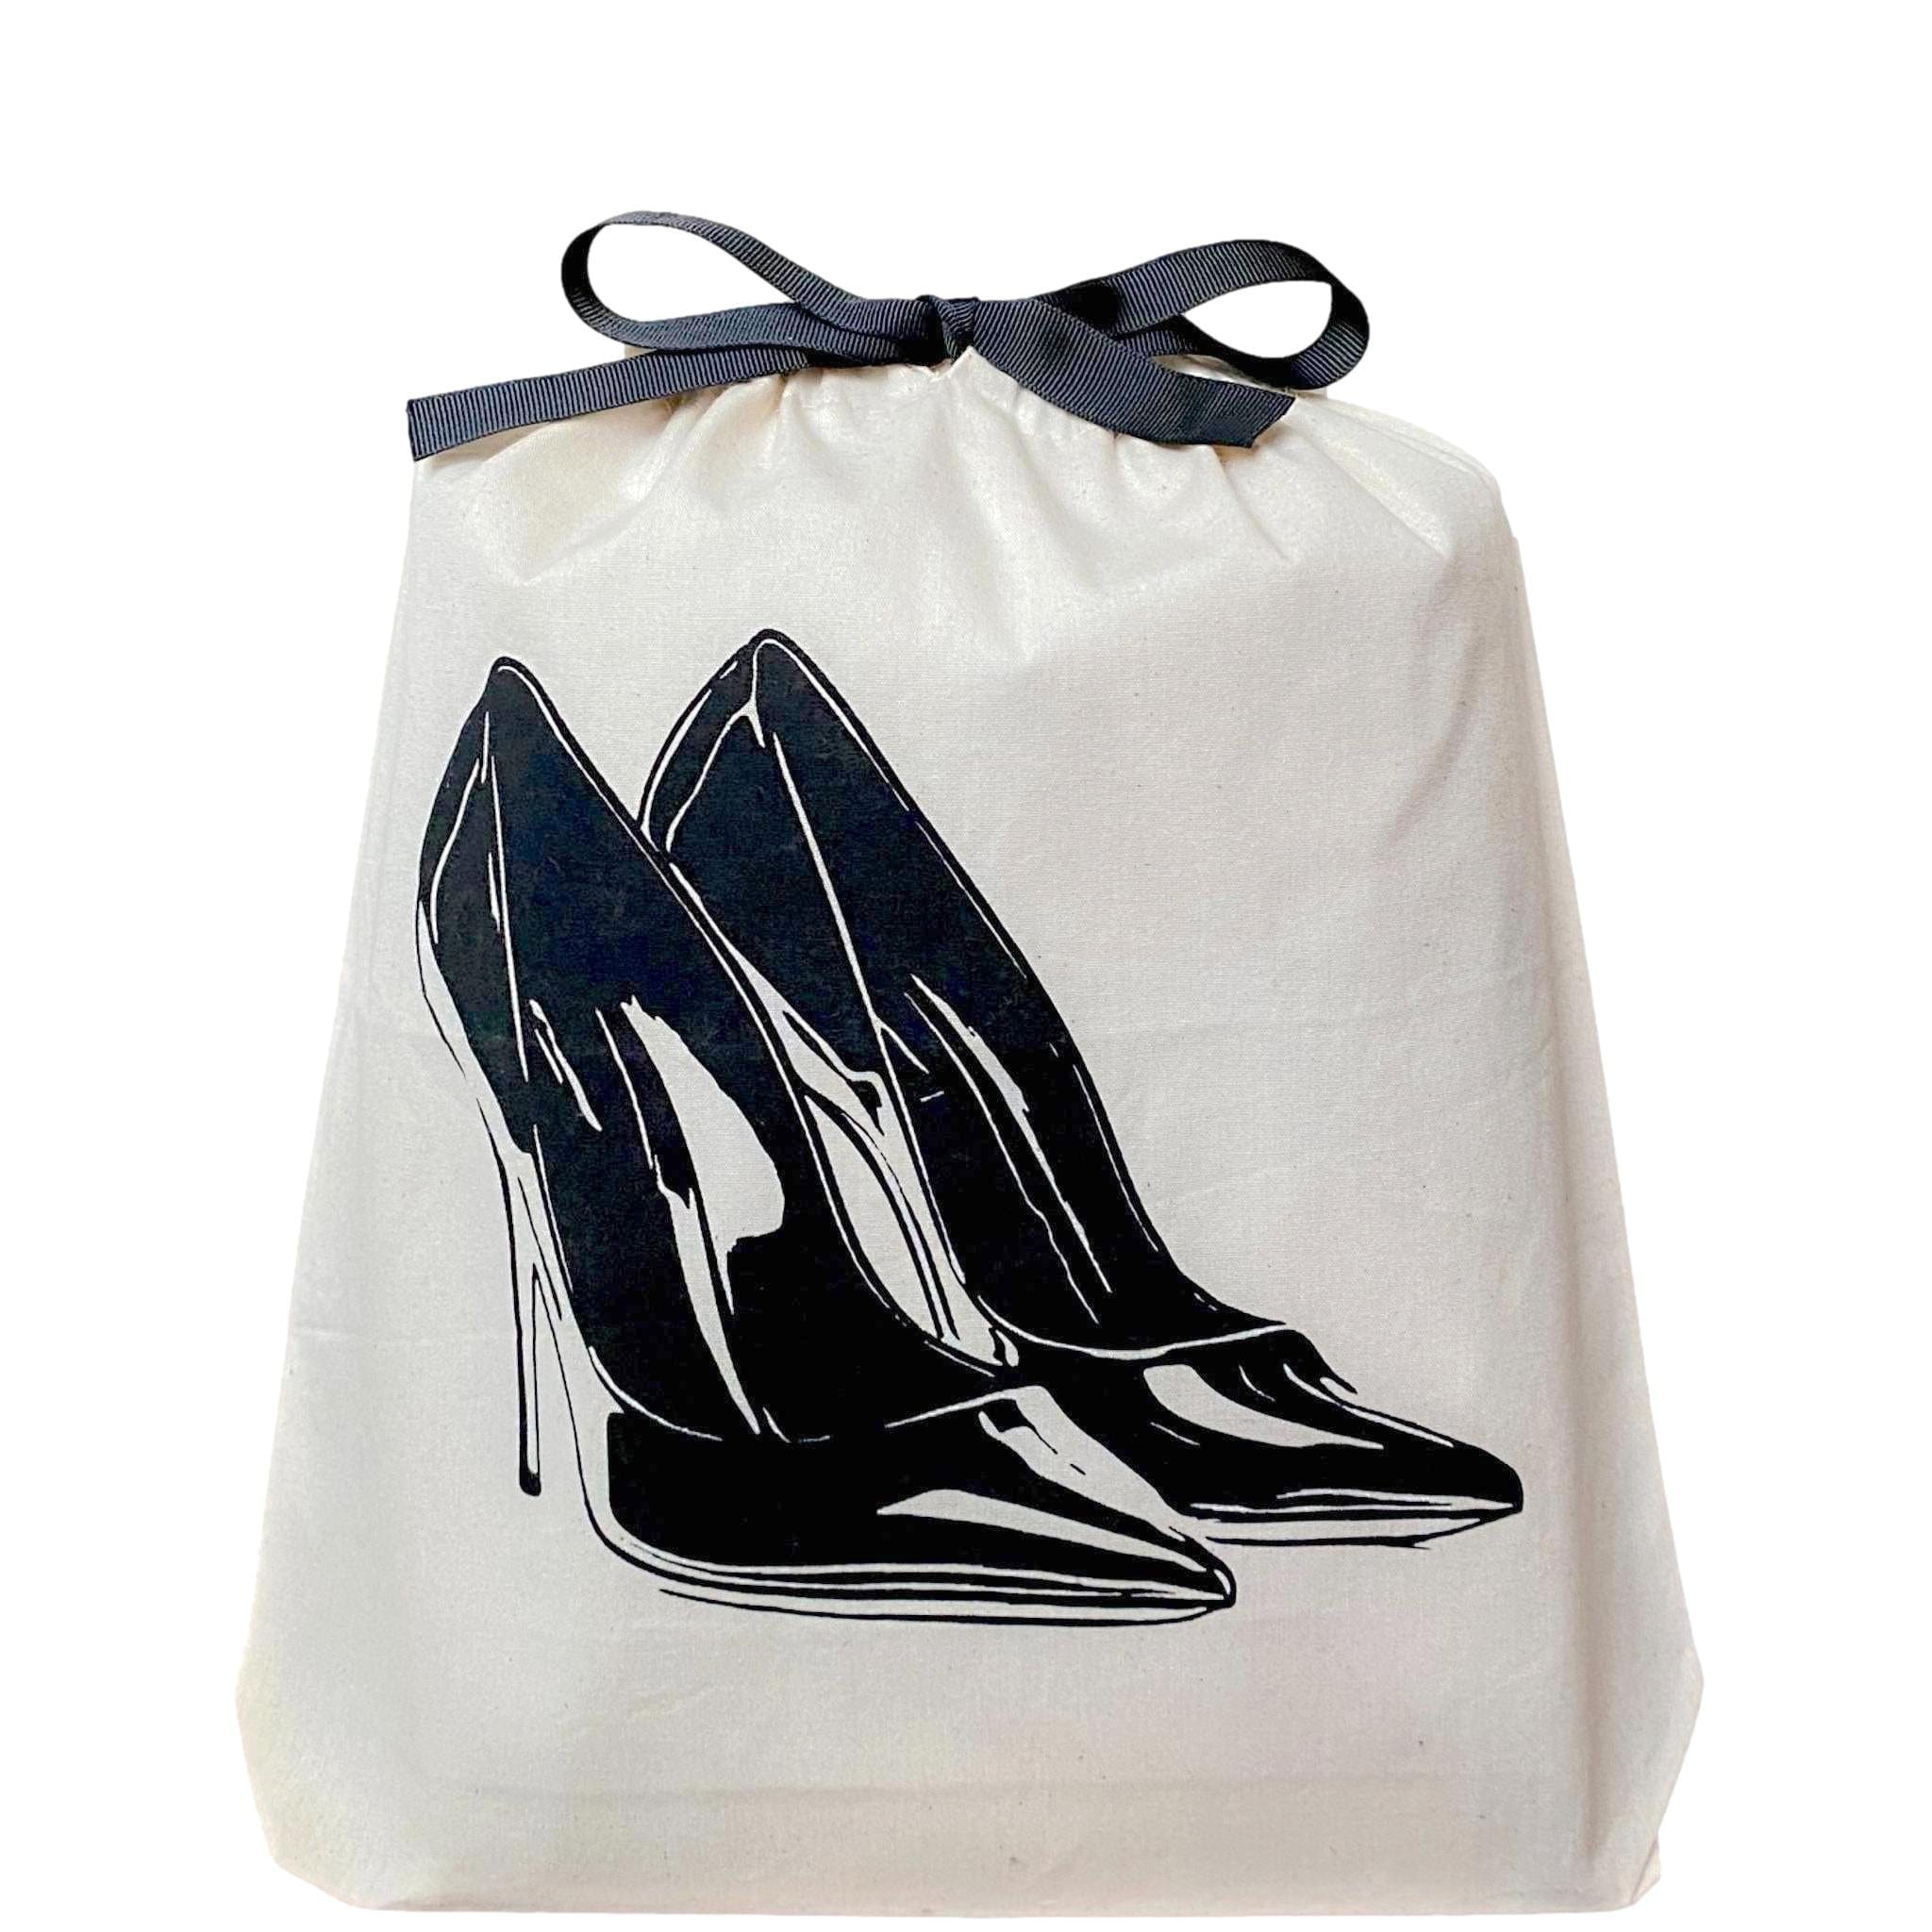 Brand new pump shoe bag from Bag-all